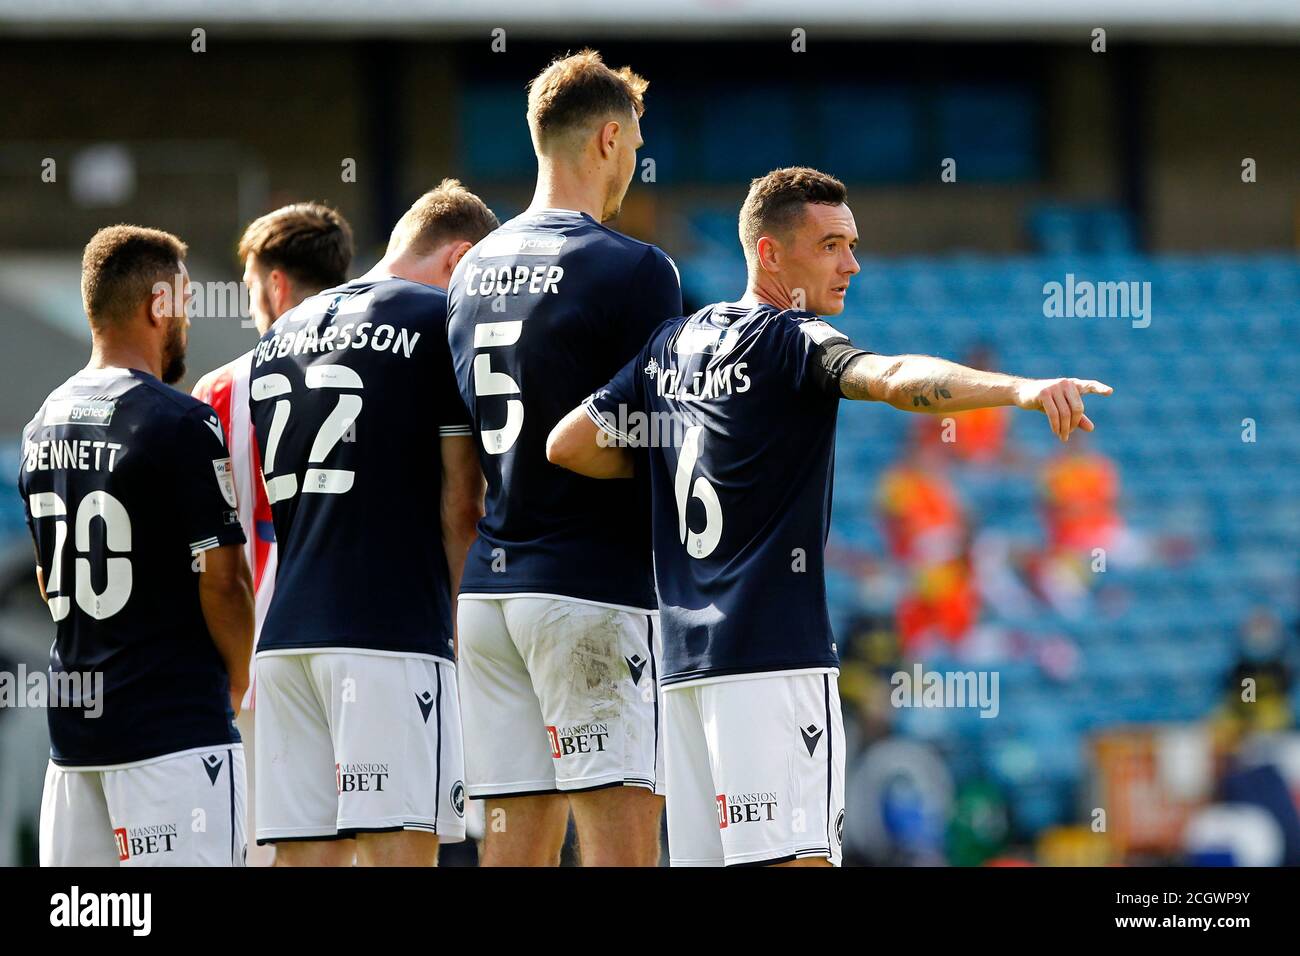 London, UK. 12th Sep, 2020. Shaun Williams of Millwall helps organise the defence during the Sky Bet Championship match behind closed doors between Millwall and Stoke City at The Den, London, England on 12 September 2020. Photo by Carlton Myrie/PRiME Media Images. Credit: PRiME Media Images/Alamy Live News Stock Photo